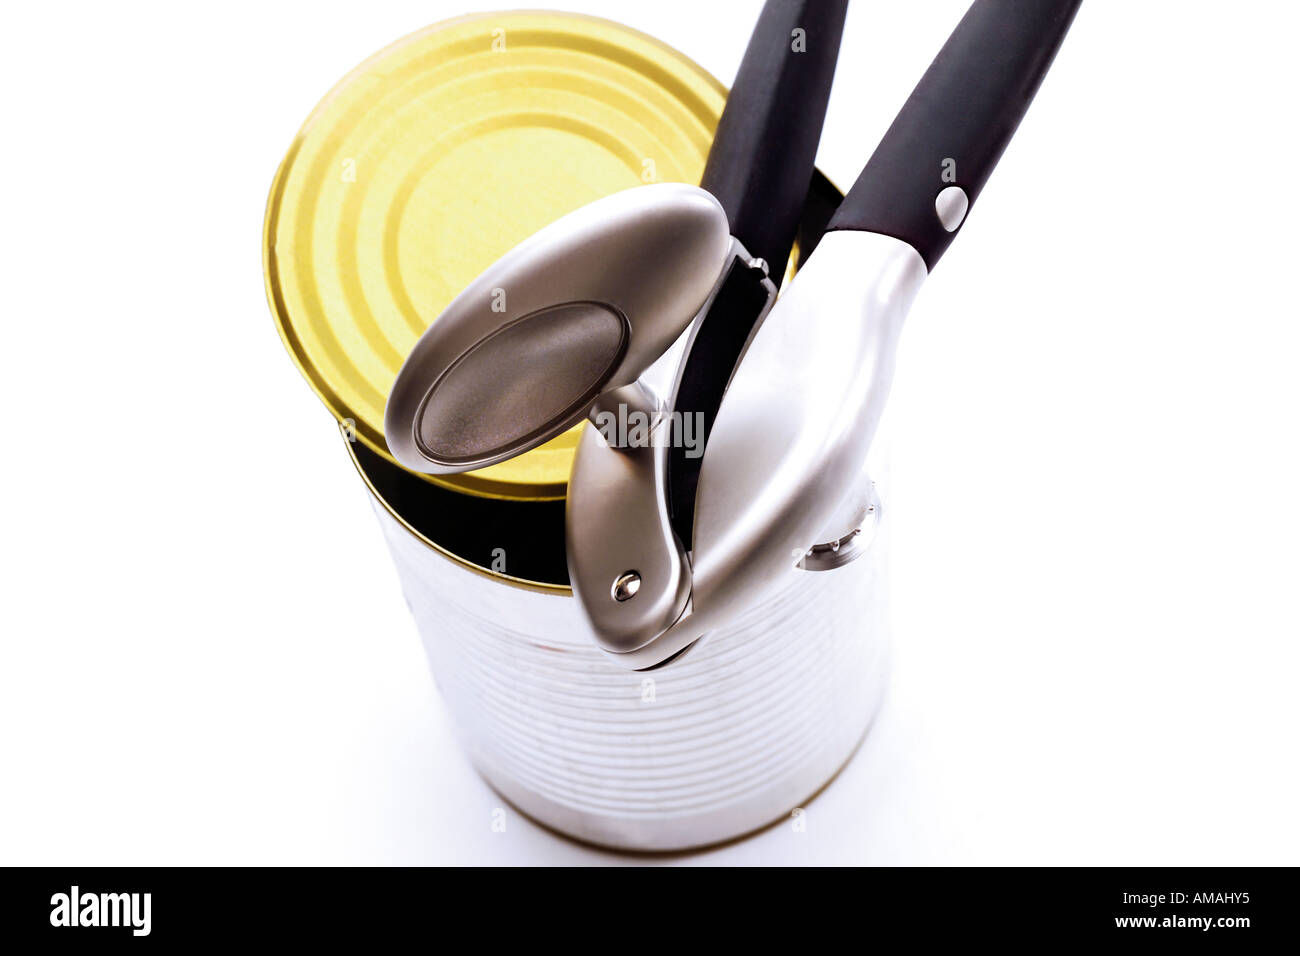 Can opener Stock Photo